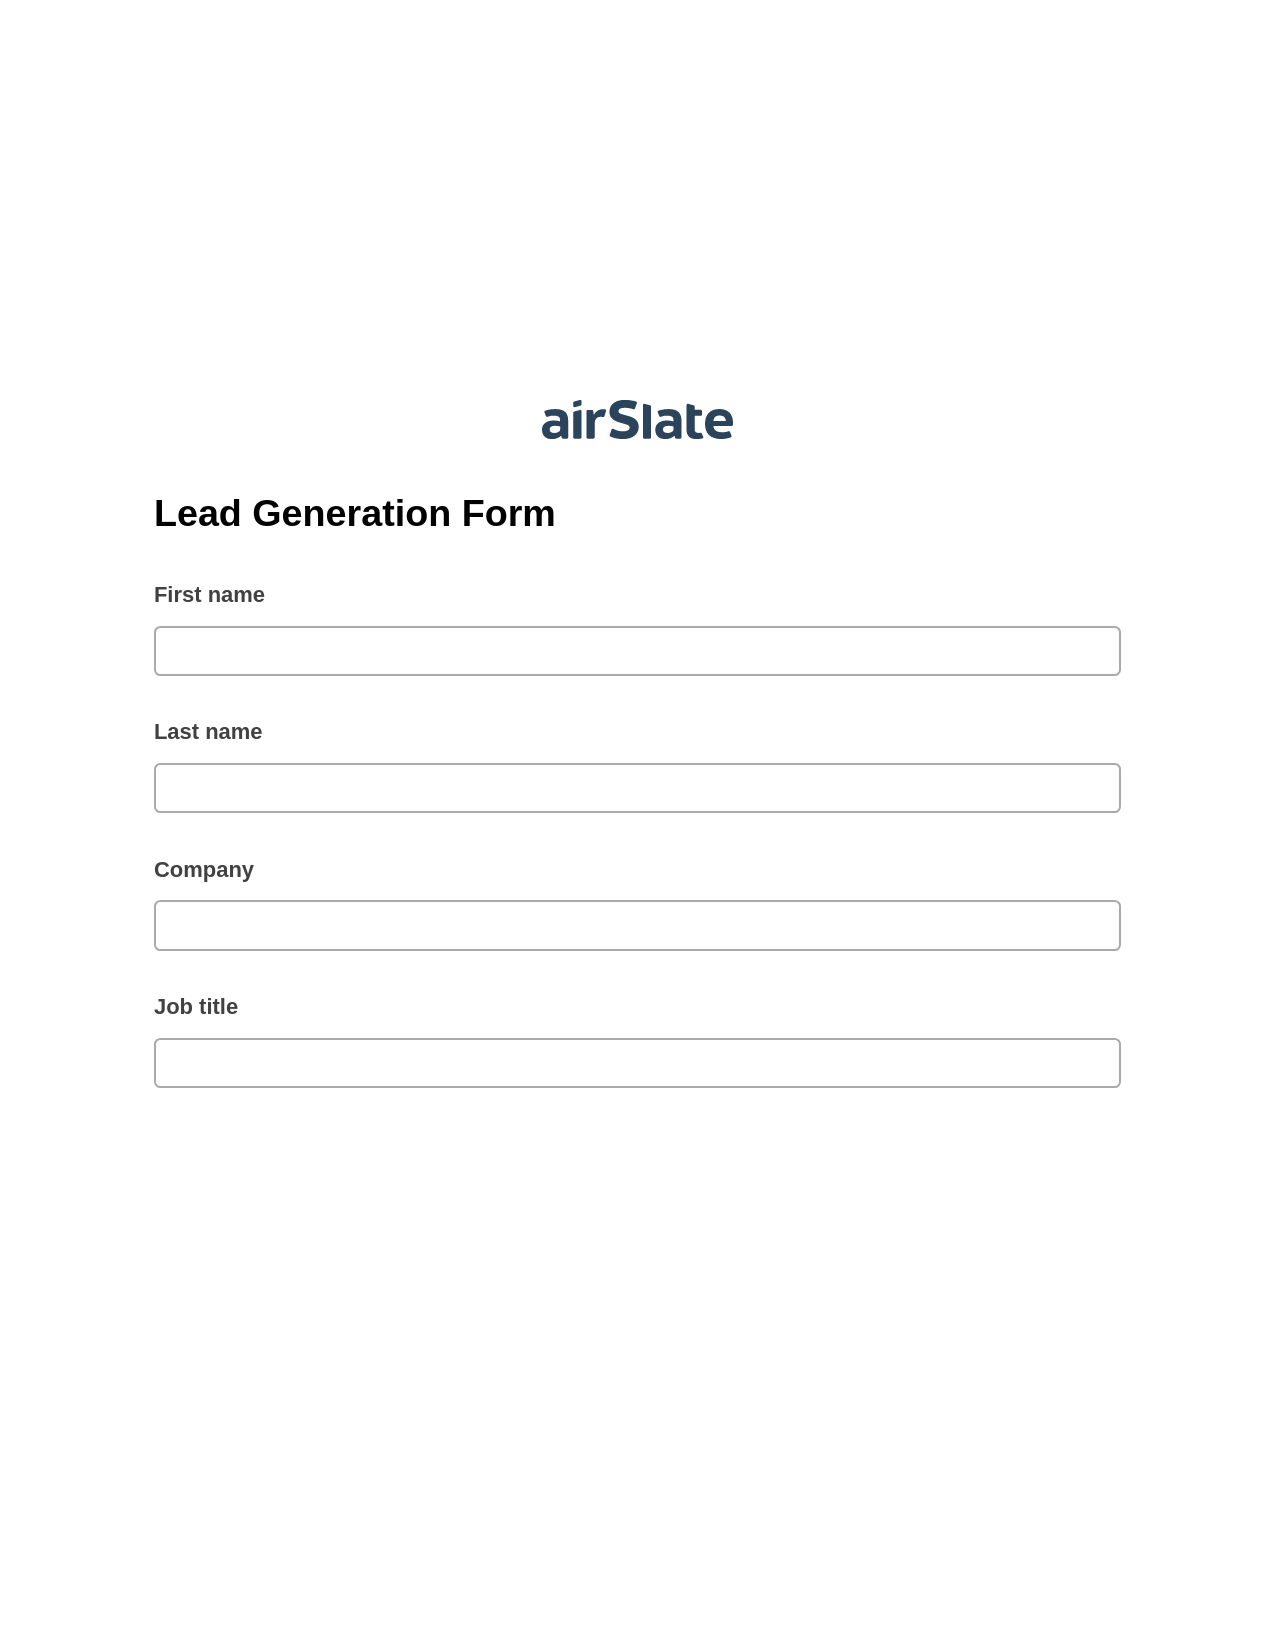 Lead Generation Form Pre-fill from Salesforce Records Bot, Send a Slate to Salesforce Contact Bot, Archive to Dropbox Bot